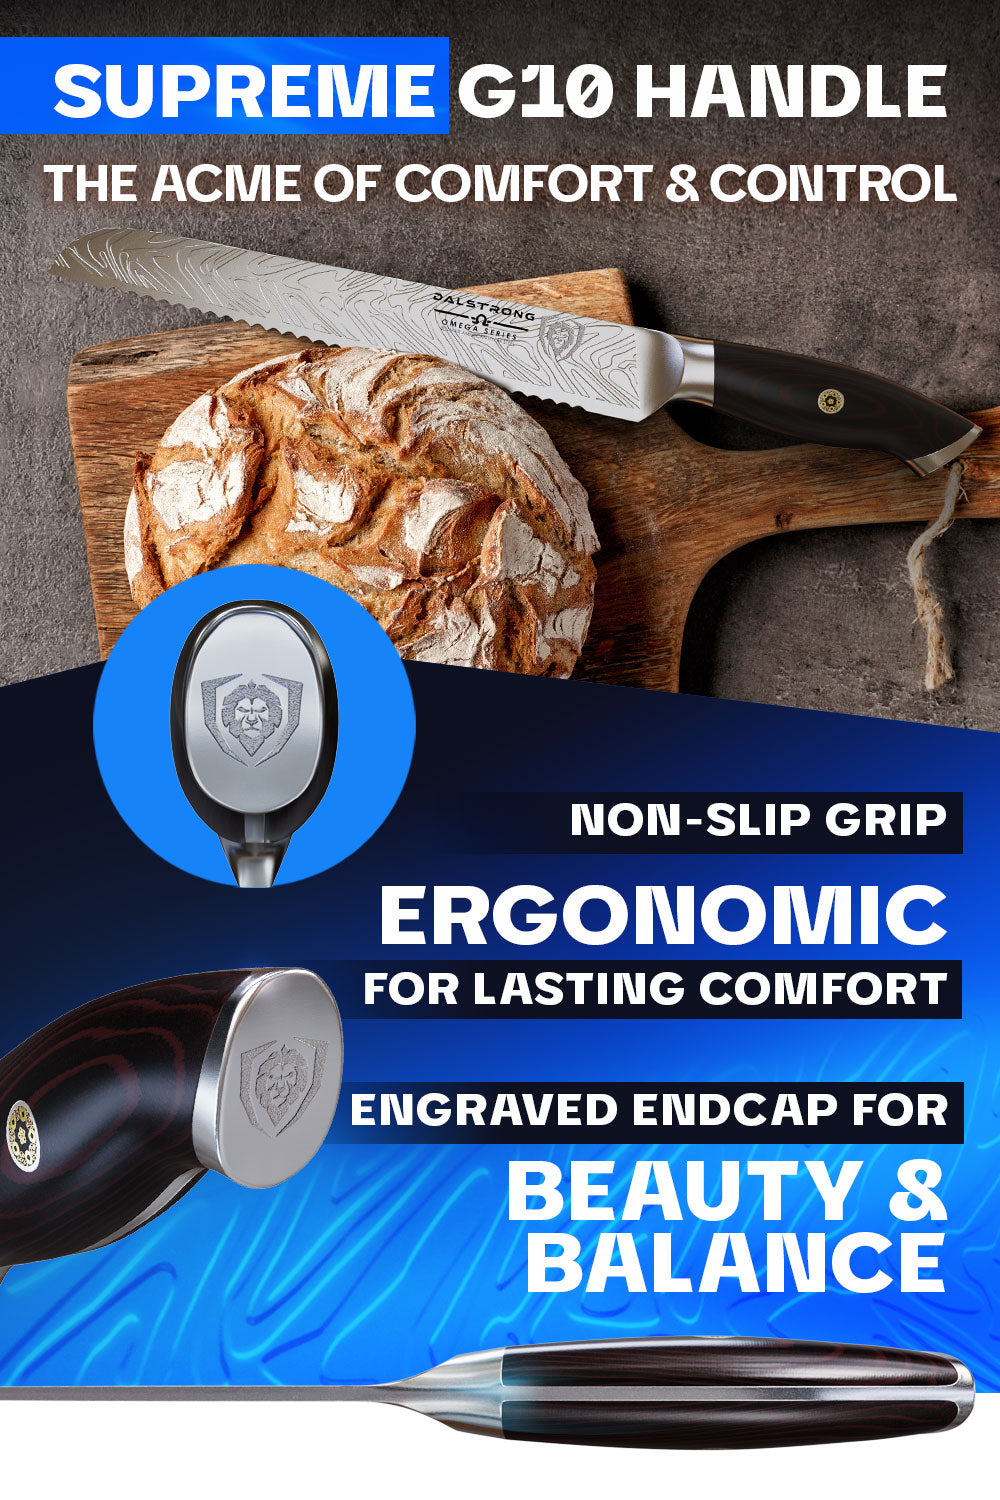 Dalstrong omega series 9 inch bread knife featuring it's comfortable G10 handle.